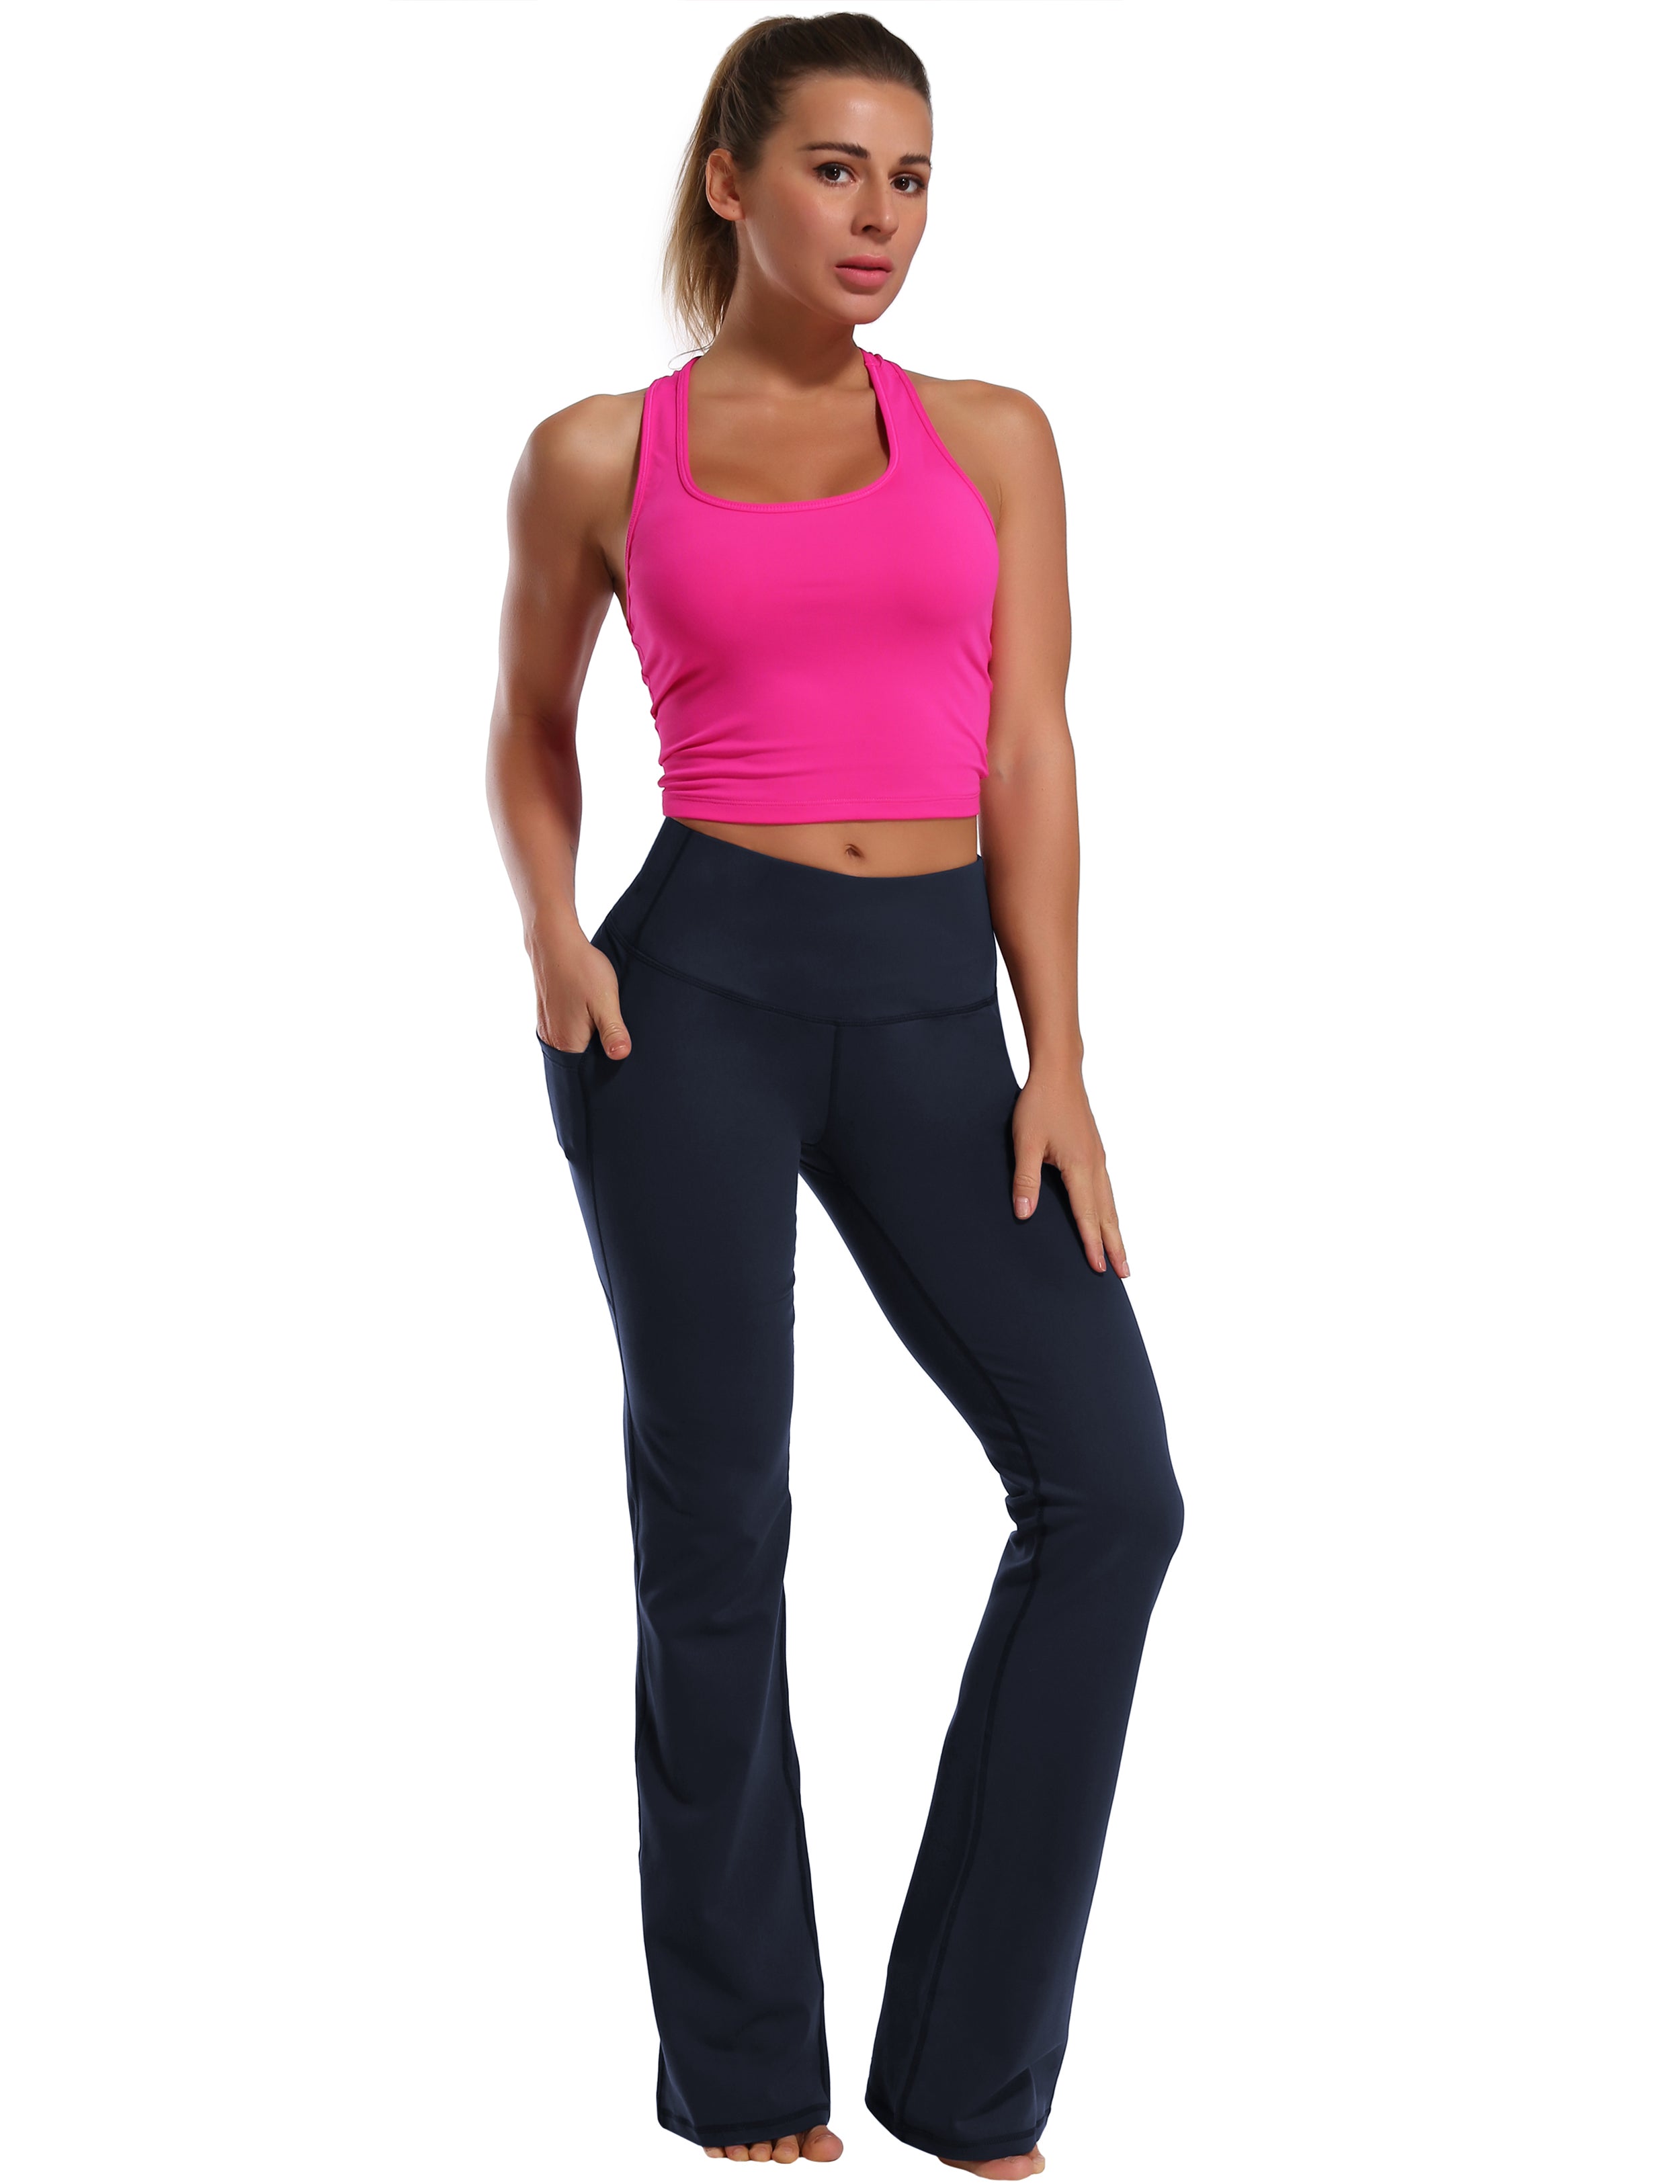 139 Side Pockets Bootcut Leggings darknavy 87%Nylon/13%Spandex Fabric doesn't attract lint easily 4-way stretch No see-through Moisture-wicking Tummy control Inner pocket Four lengths